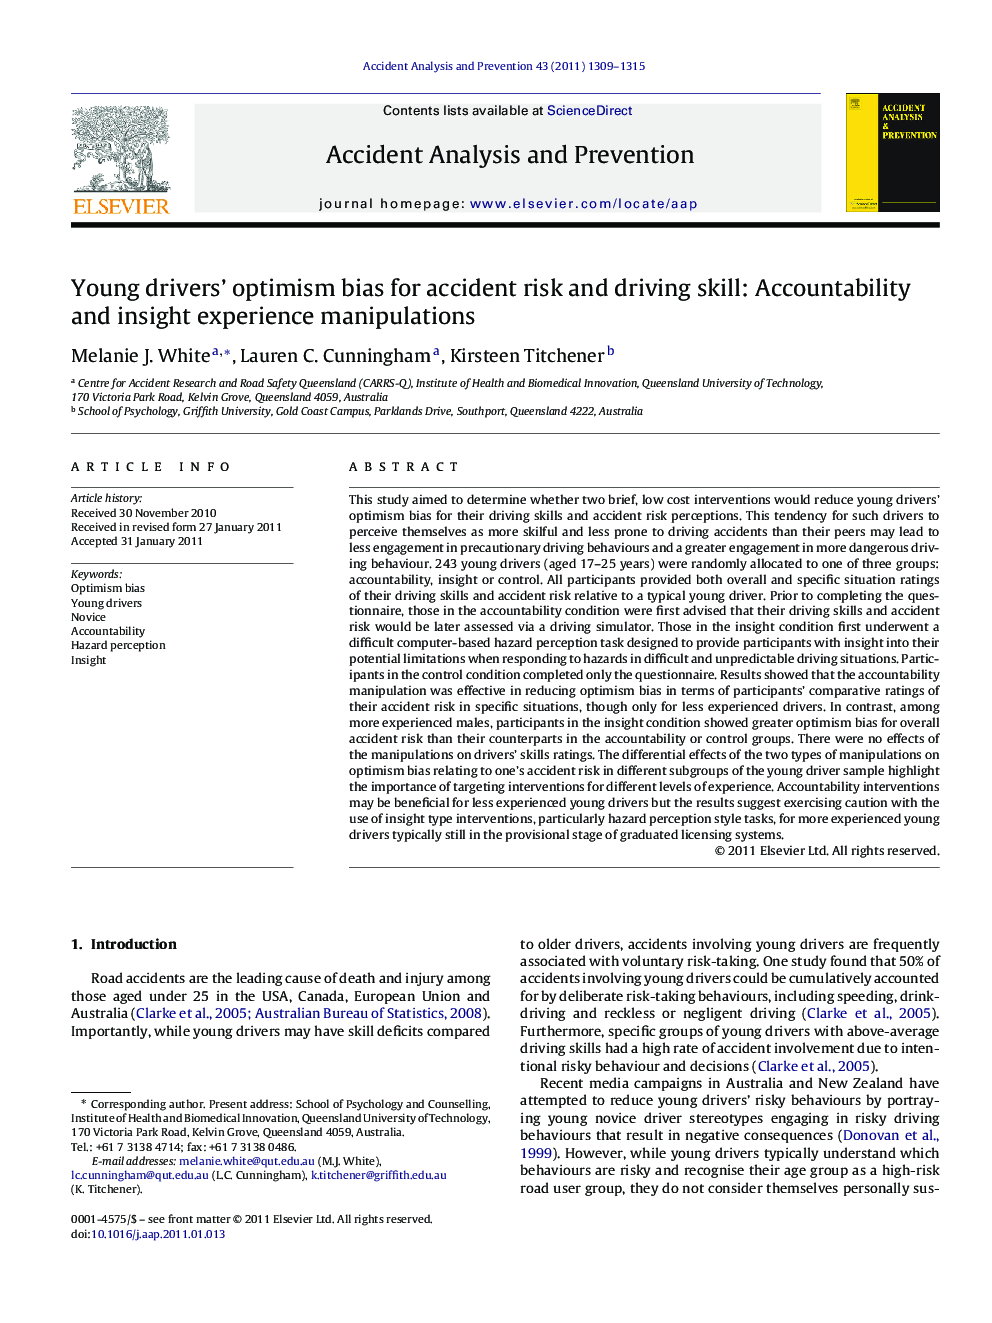 Young drivers’ optimism bias for accident risk and driving skill: Accountability and insight experience manipulations